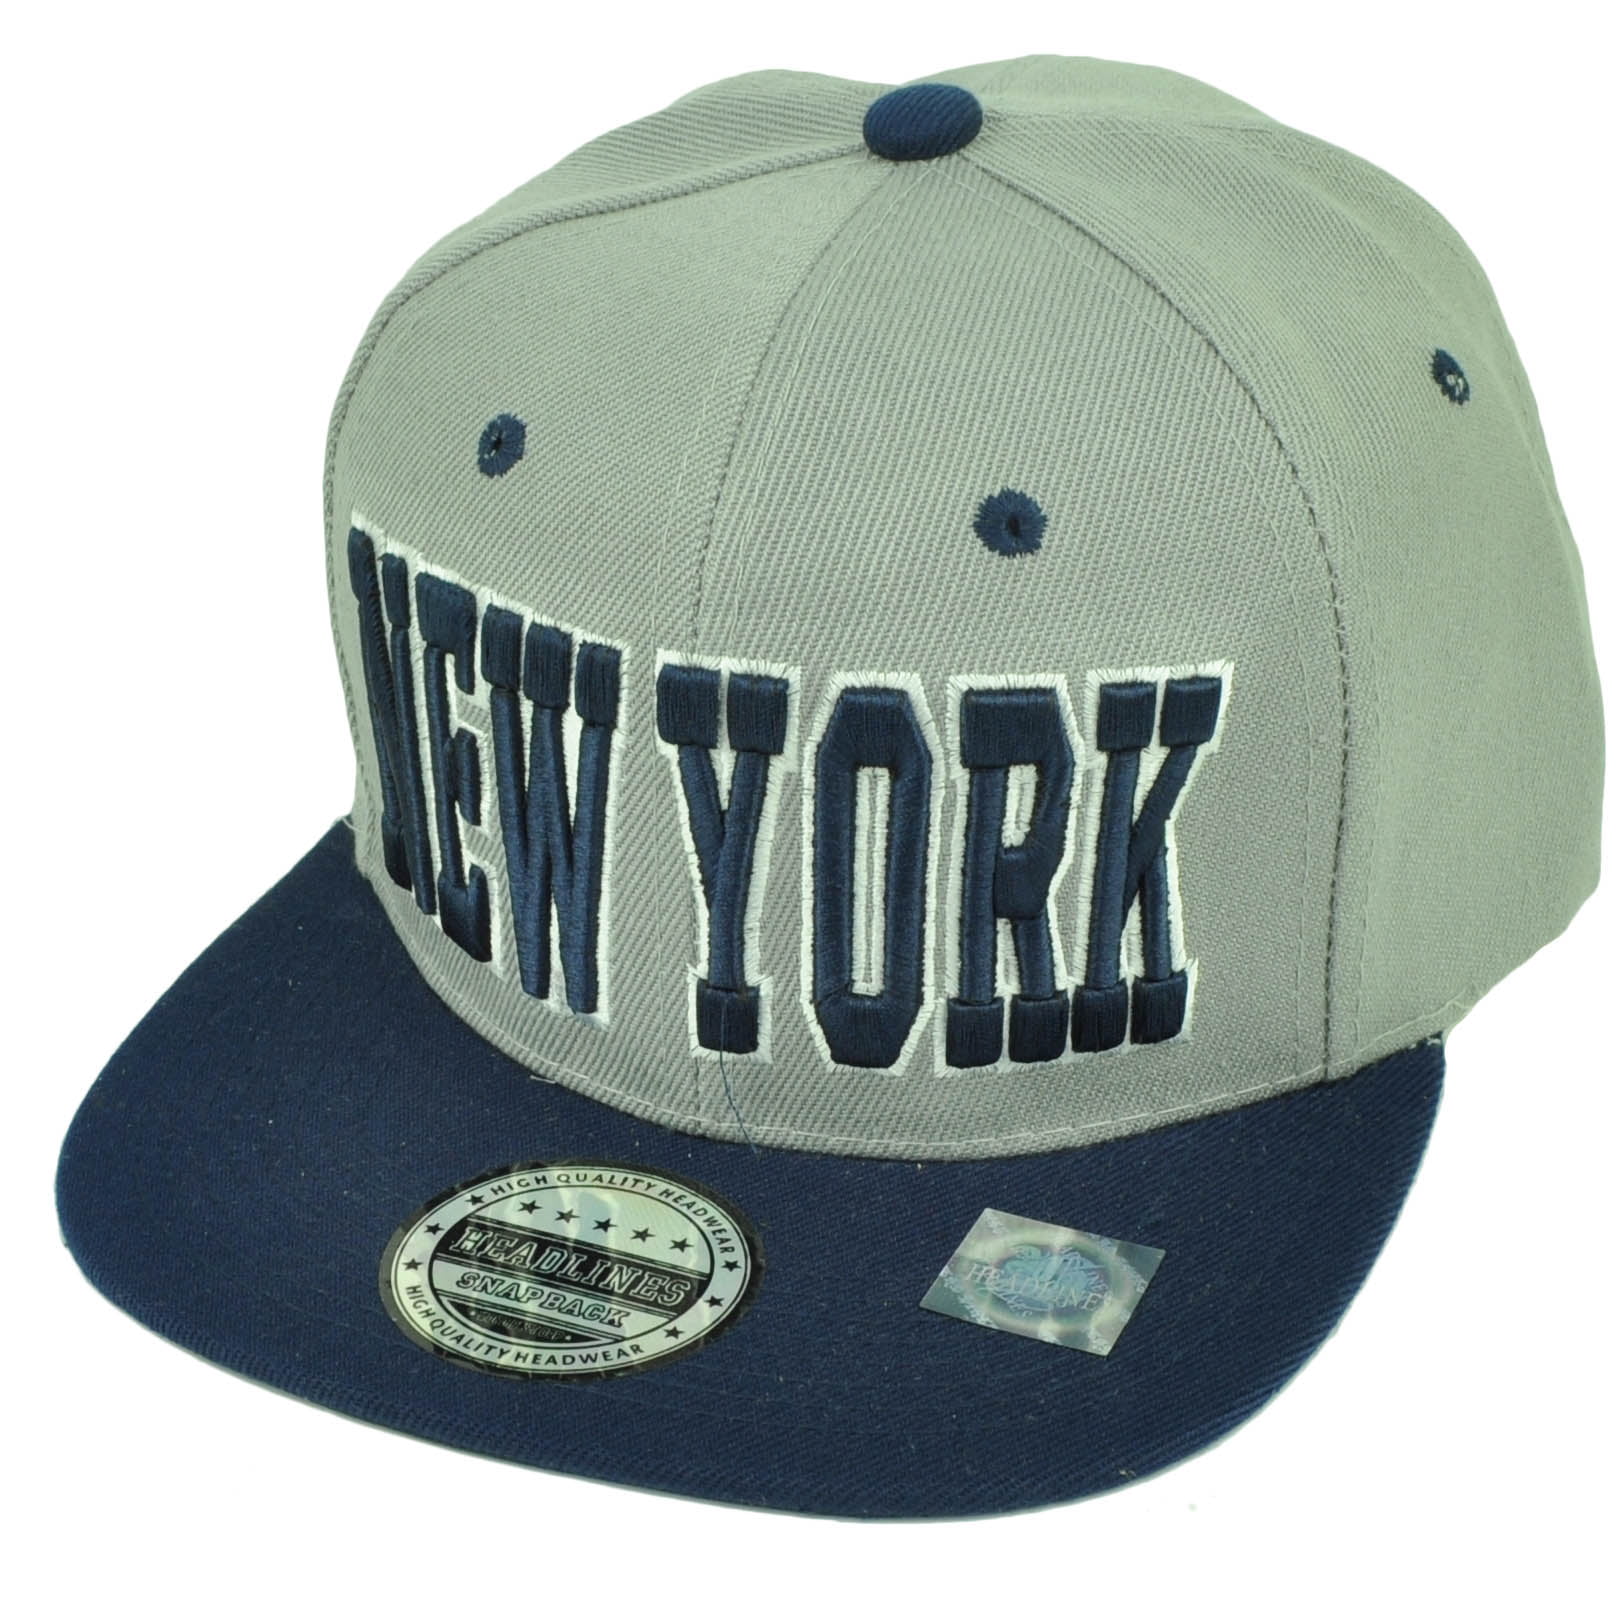 NEW YORK 3D EMBROIDERED FLAT BILL TWO TONE BLUE/GREY COTTON SNAPBACK 